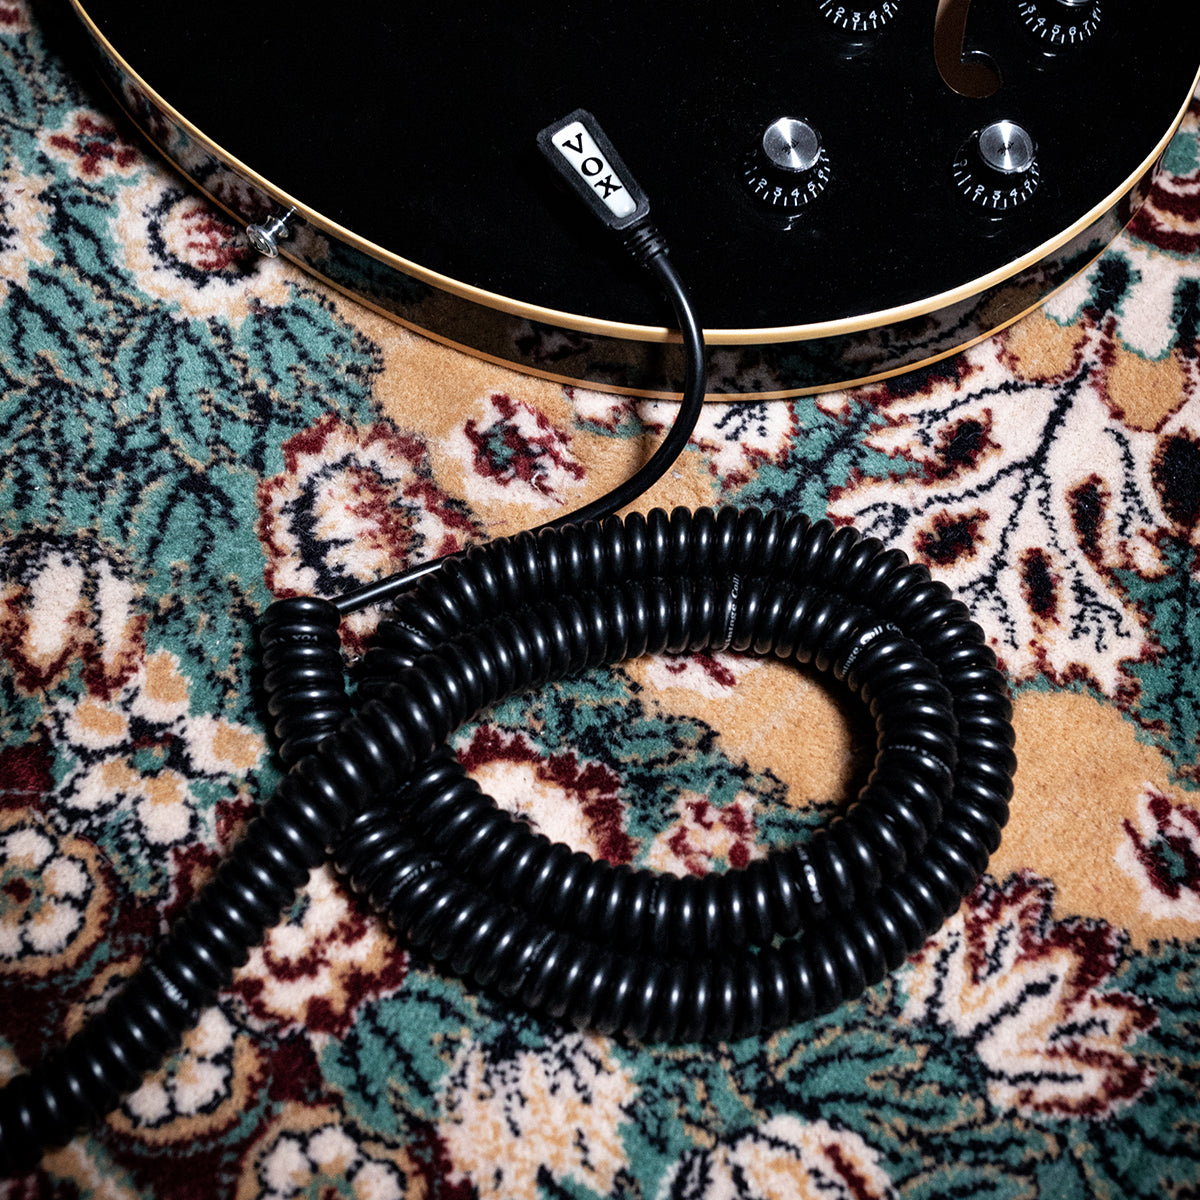 Vintage Coil Cable plugged into a black electric guitar